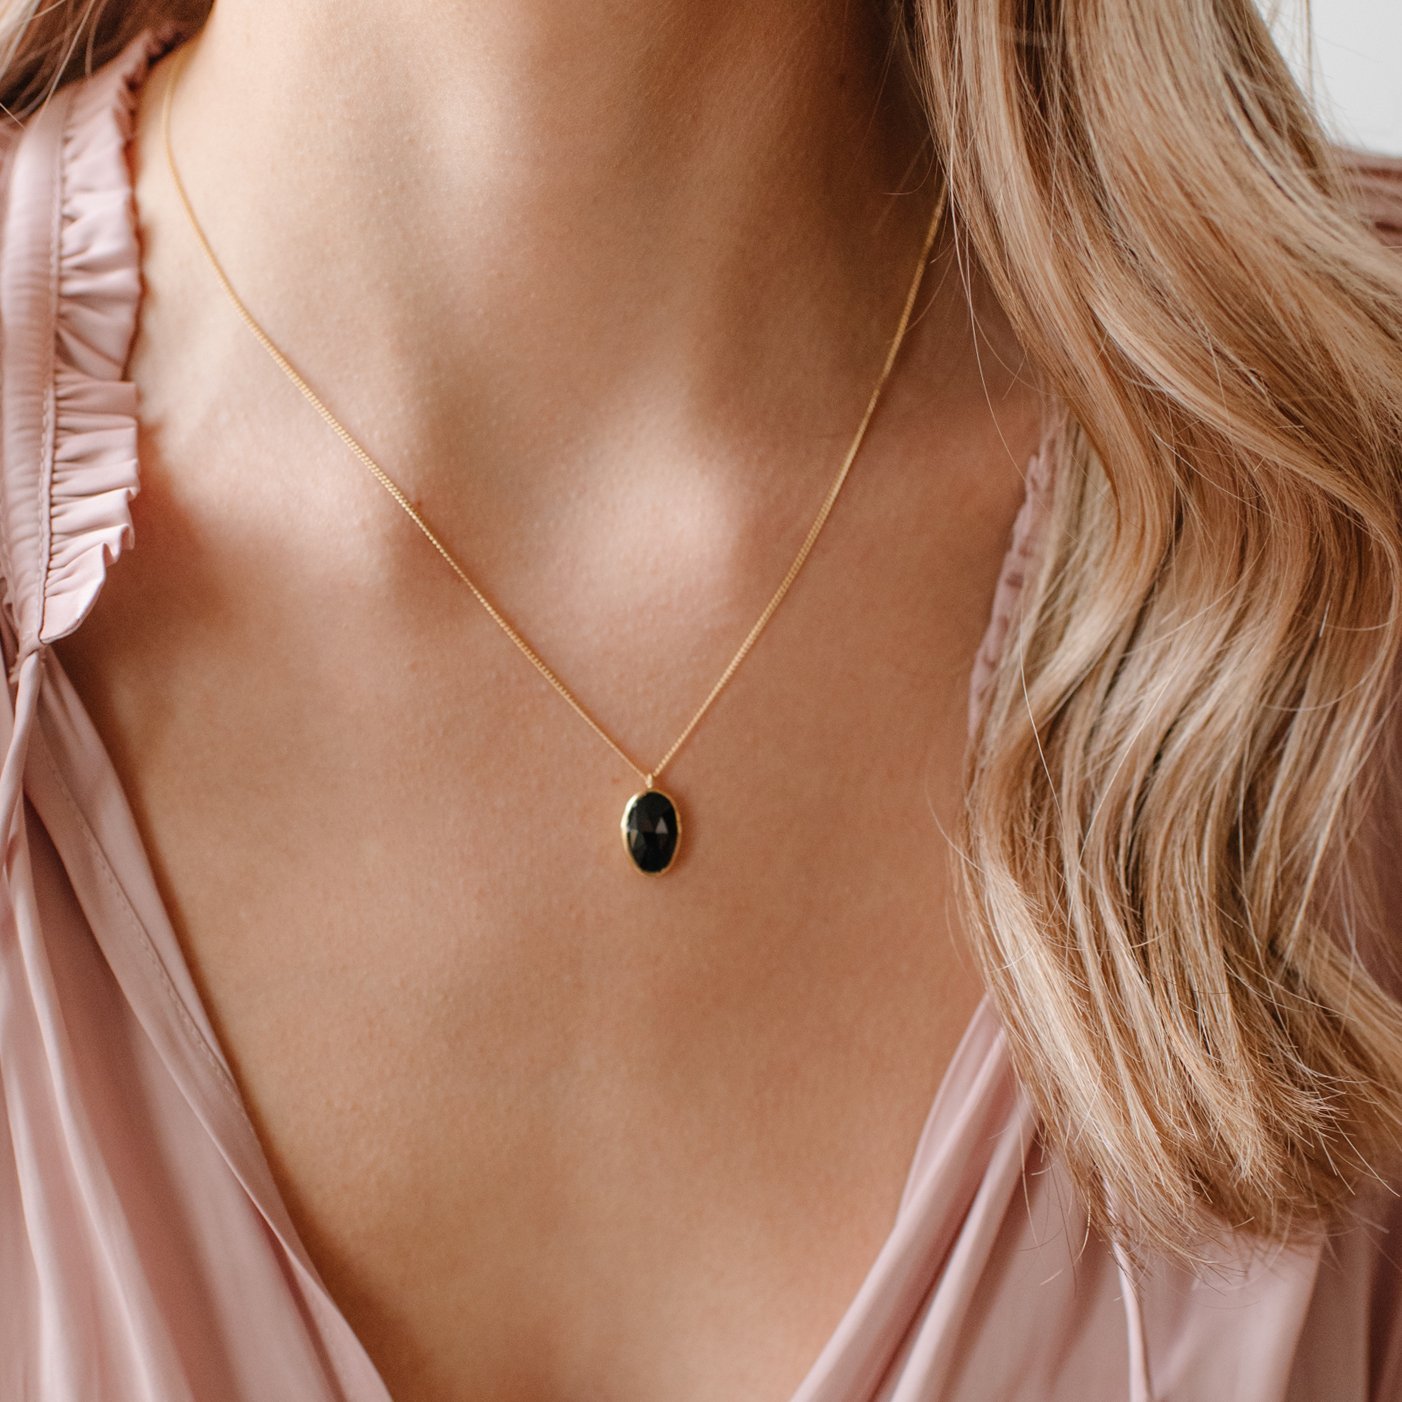 PROTECT PENDANT NECKLACE - BLACK ONYX & GOLD - SO PRETTY CARA COTTER